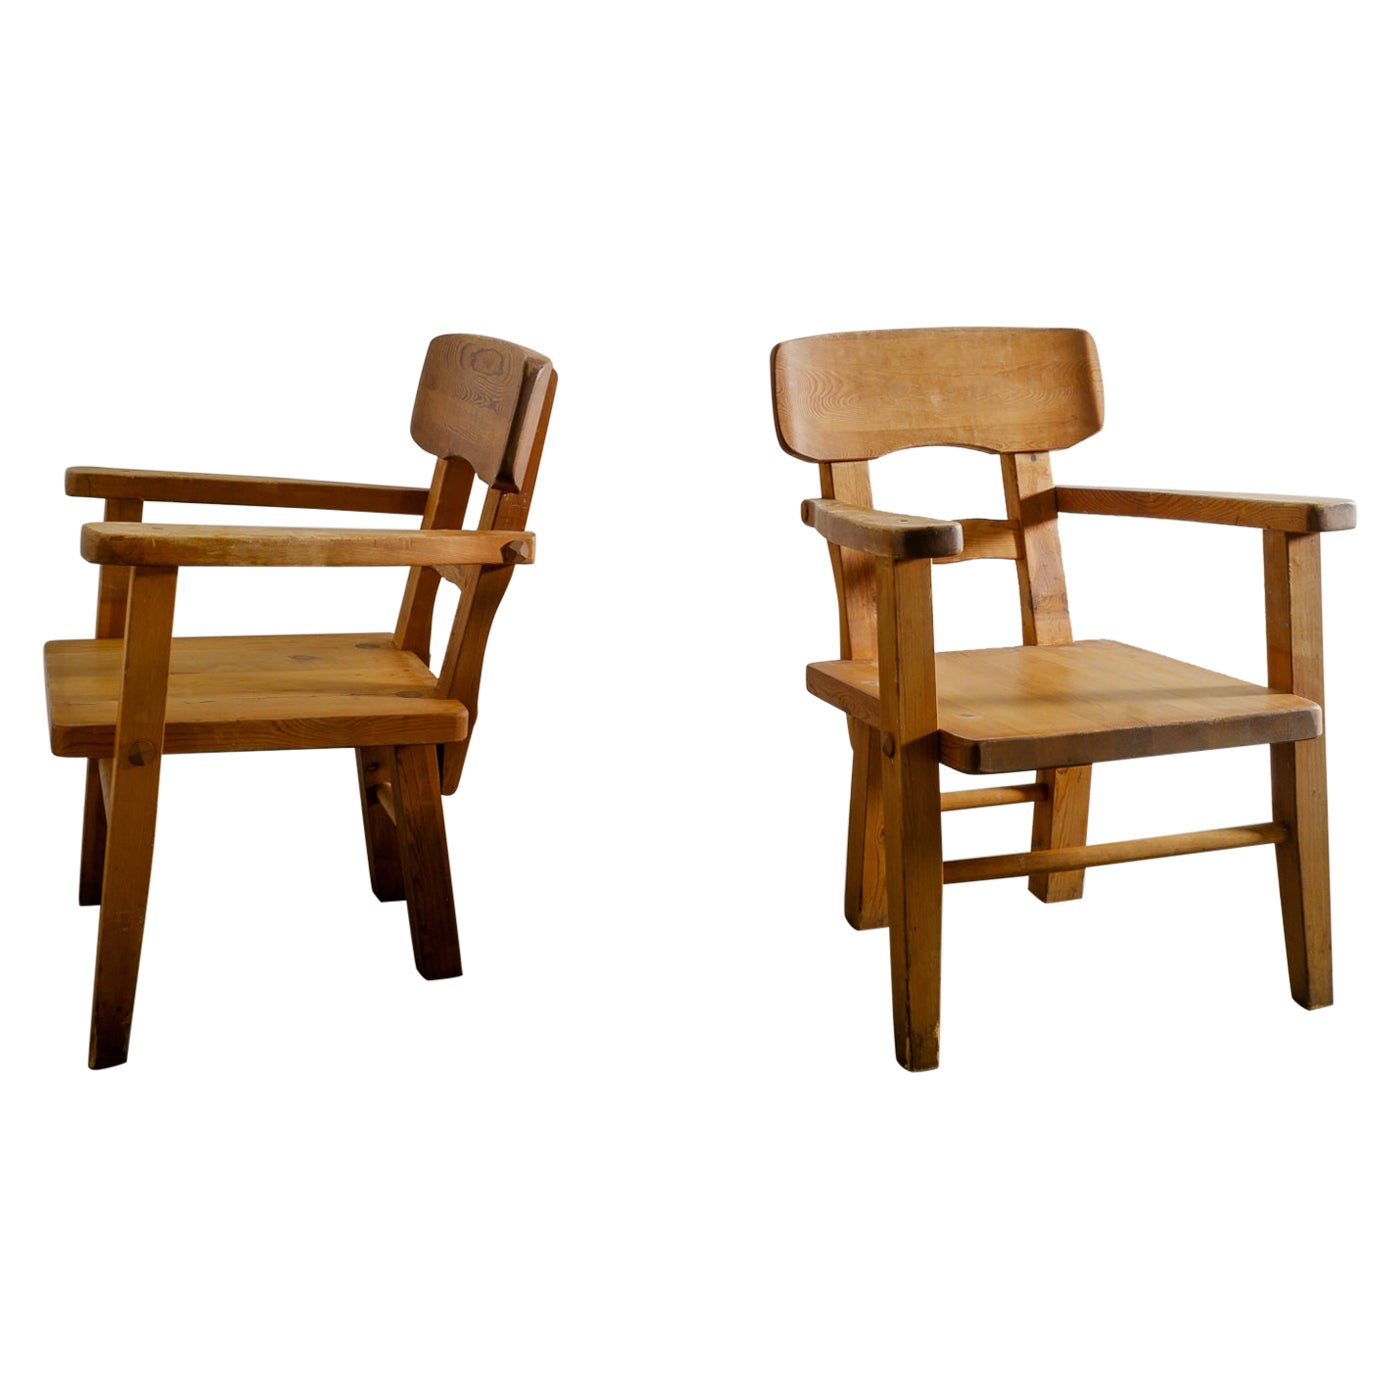 Pair of Swedish Brutalist Armchairs in Stained Pine Produced by Vemdalia, 1970s